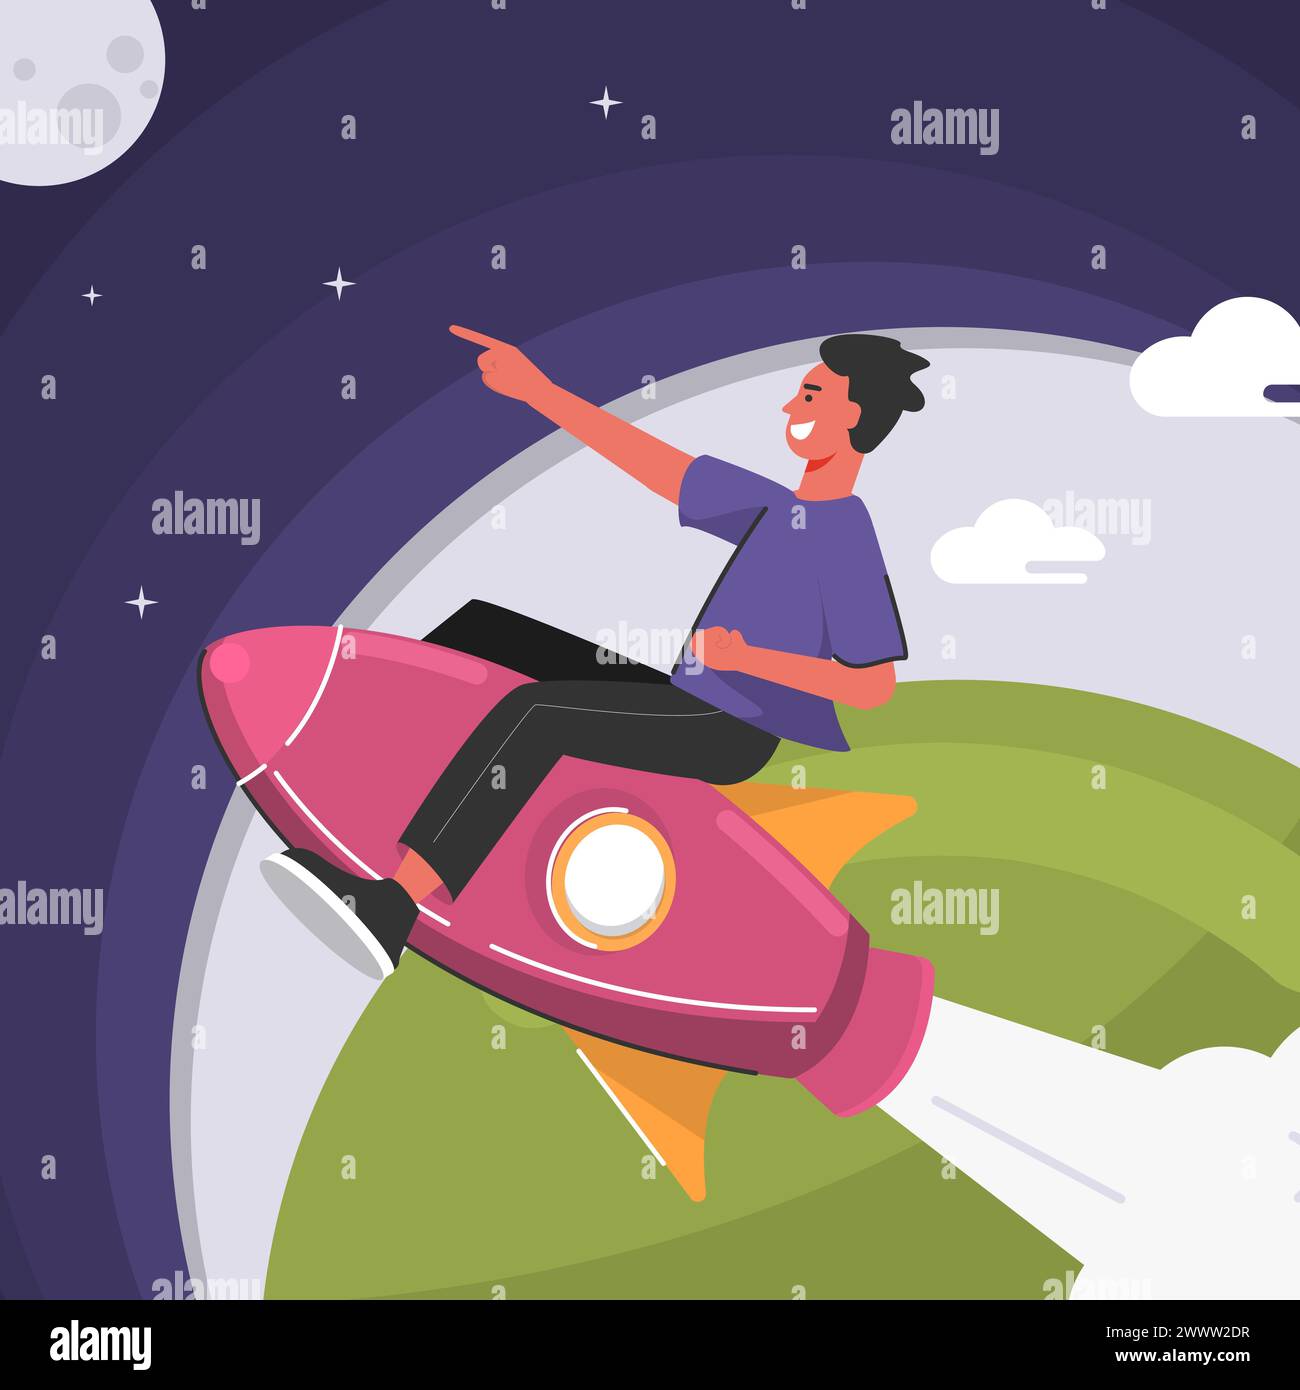 Young Man Flying To The Moon with Rocket Vector Illustration, Chasing Dream Concept, Illustration of Little Kids riding on a Rocket to success Stock Vector